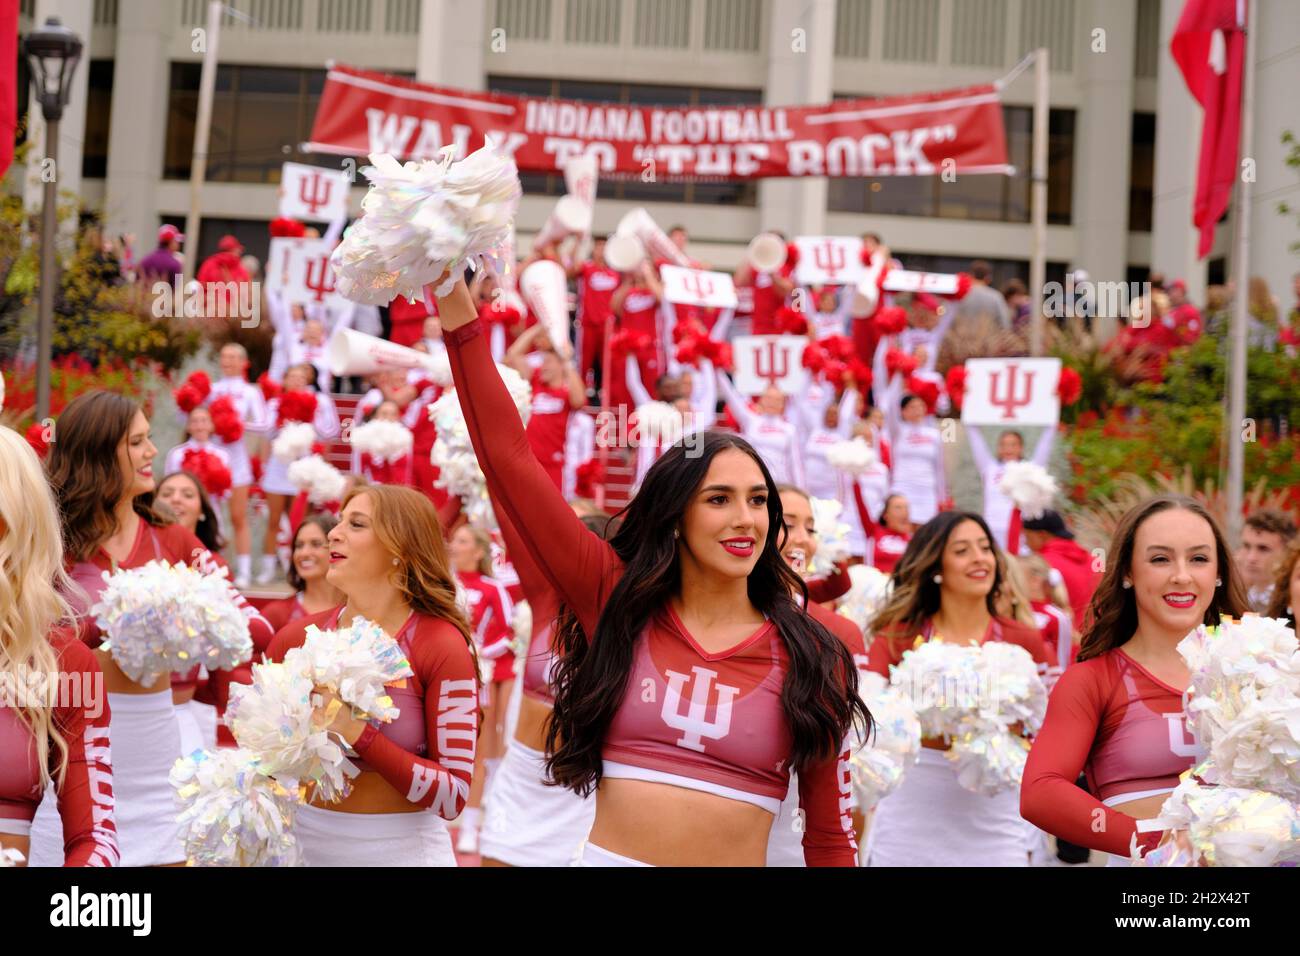 BLOOMINGTON, UNITED STATES - 2021/10/23: Indiana University’s Redsteppers cheer on the steps to Assembly Hall before IU plays Ohio State during an NCAA football game on October 16, 2021 at Memorial Stadium in Bloomington, Ind. Ohio State beat Indiana University 54-7. Stock Photo